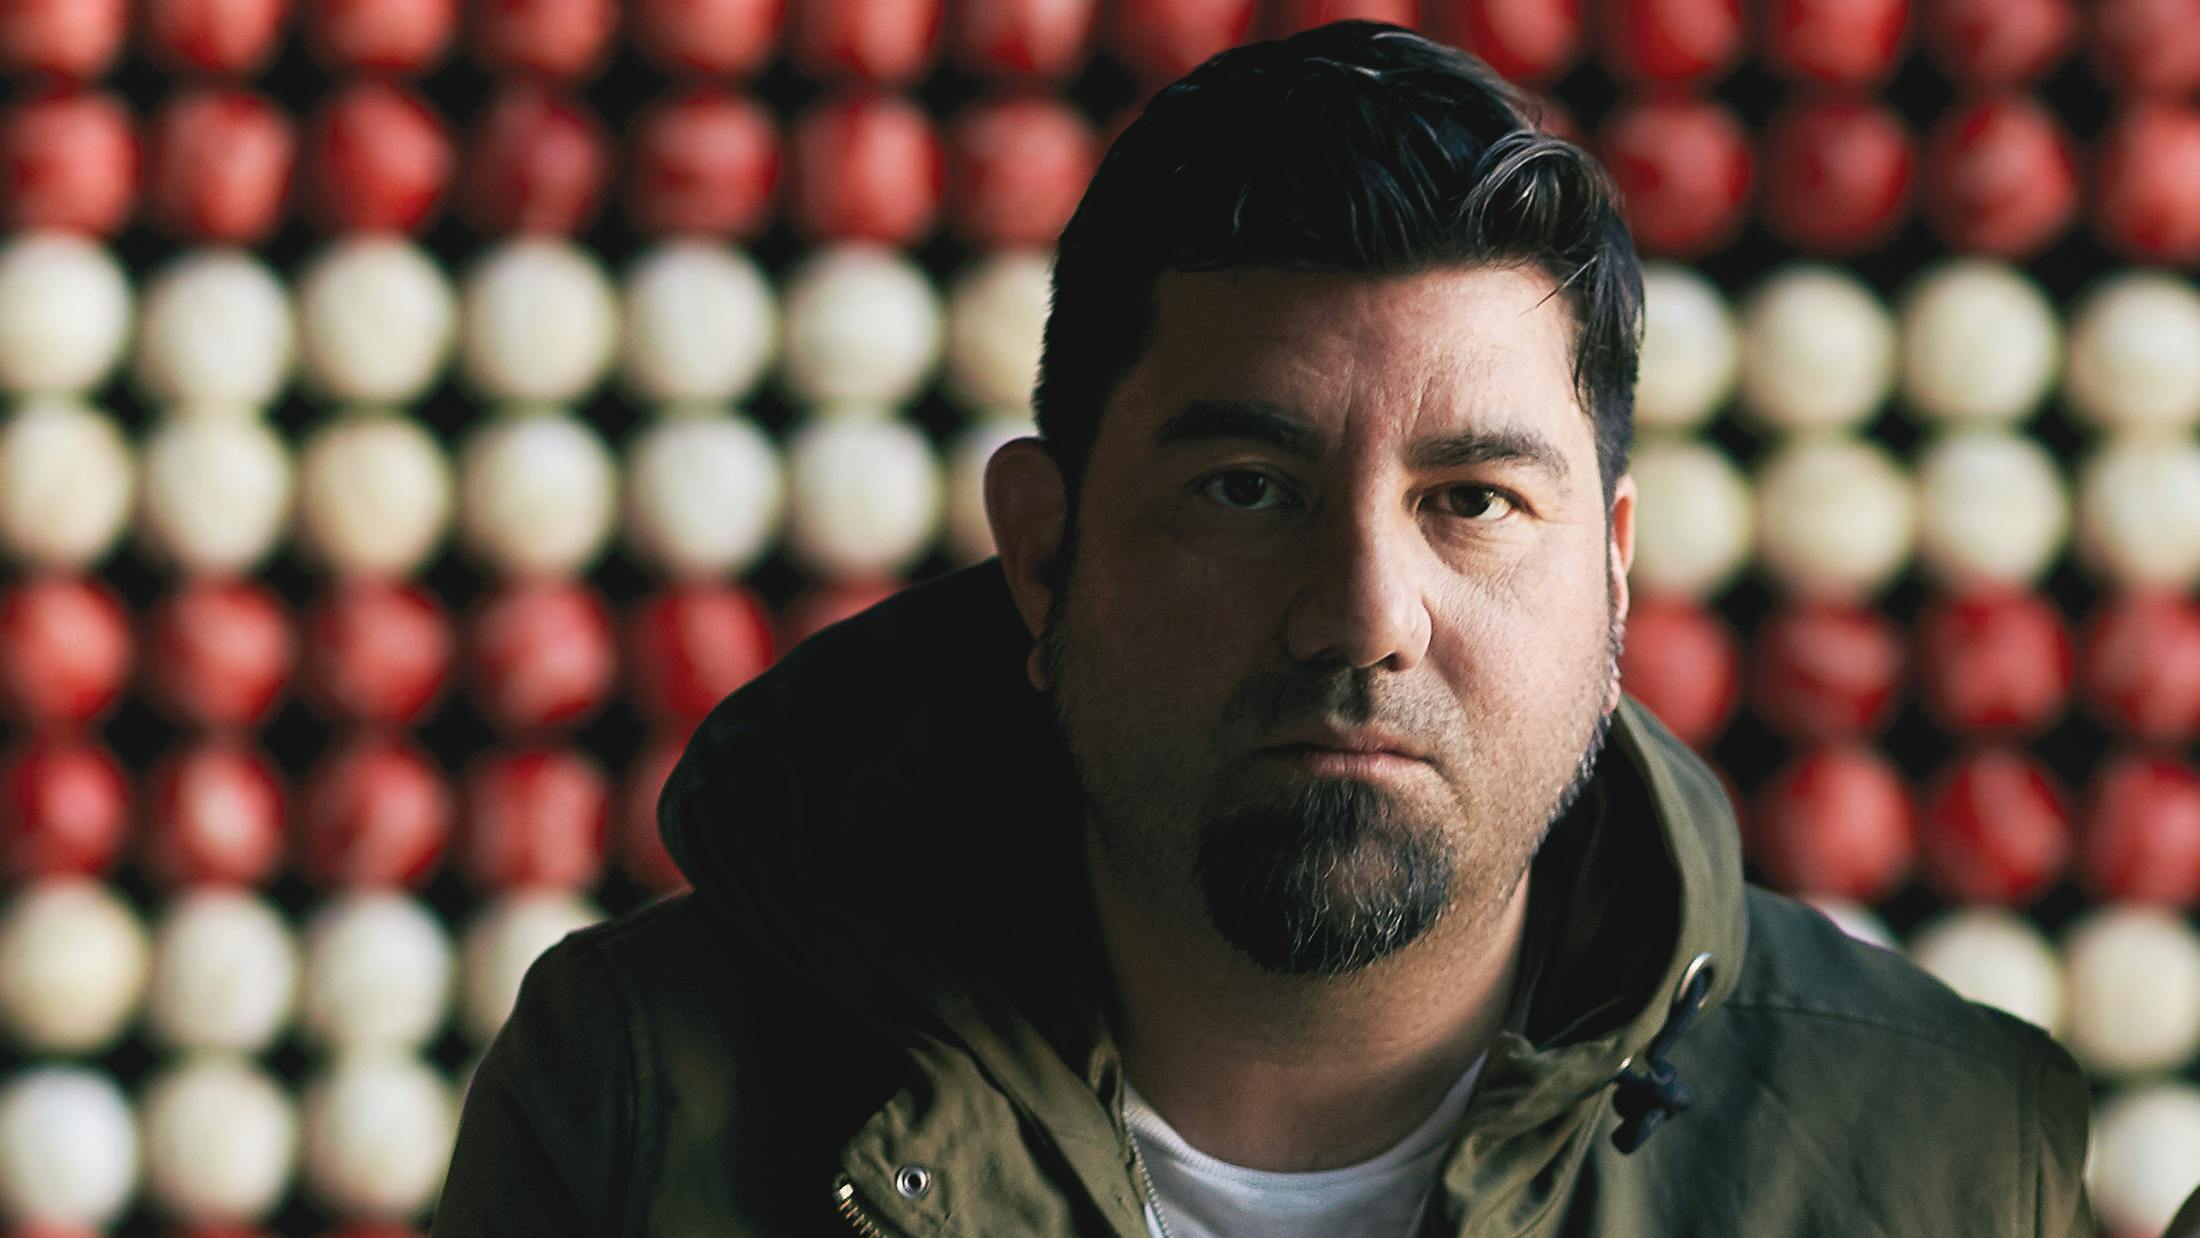 Deftones’ Chino Moreno: “It’s kind of a weird thing to say, but a lot of the time I’d just rather not talk to people”